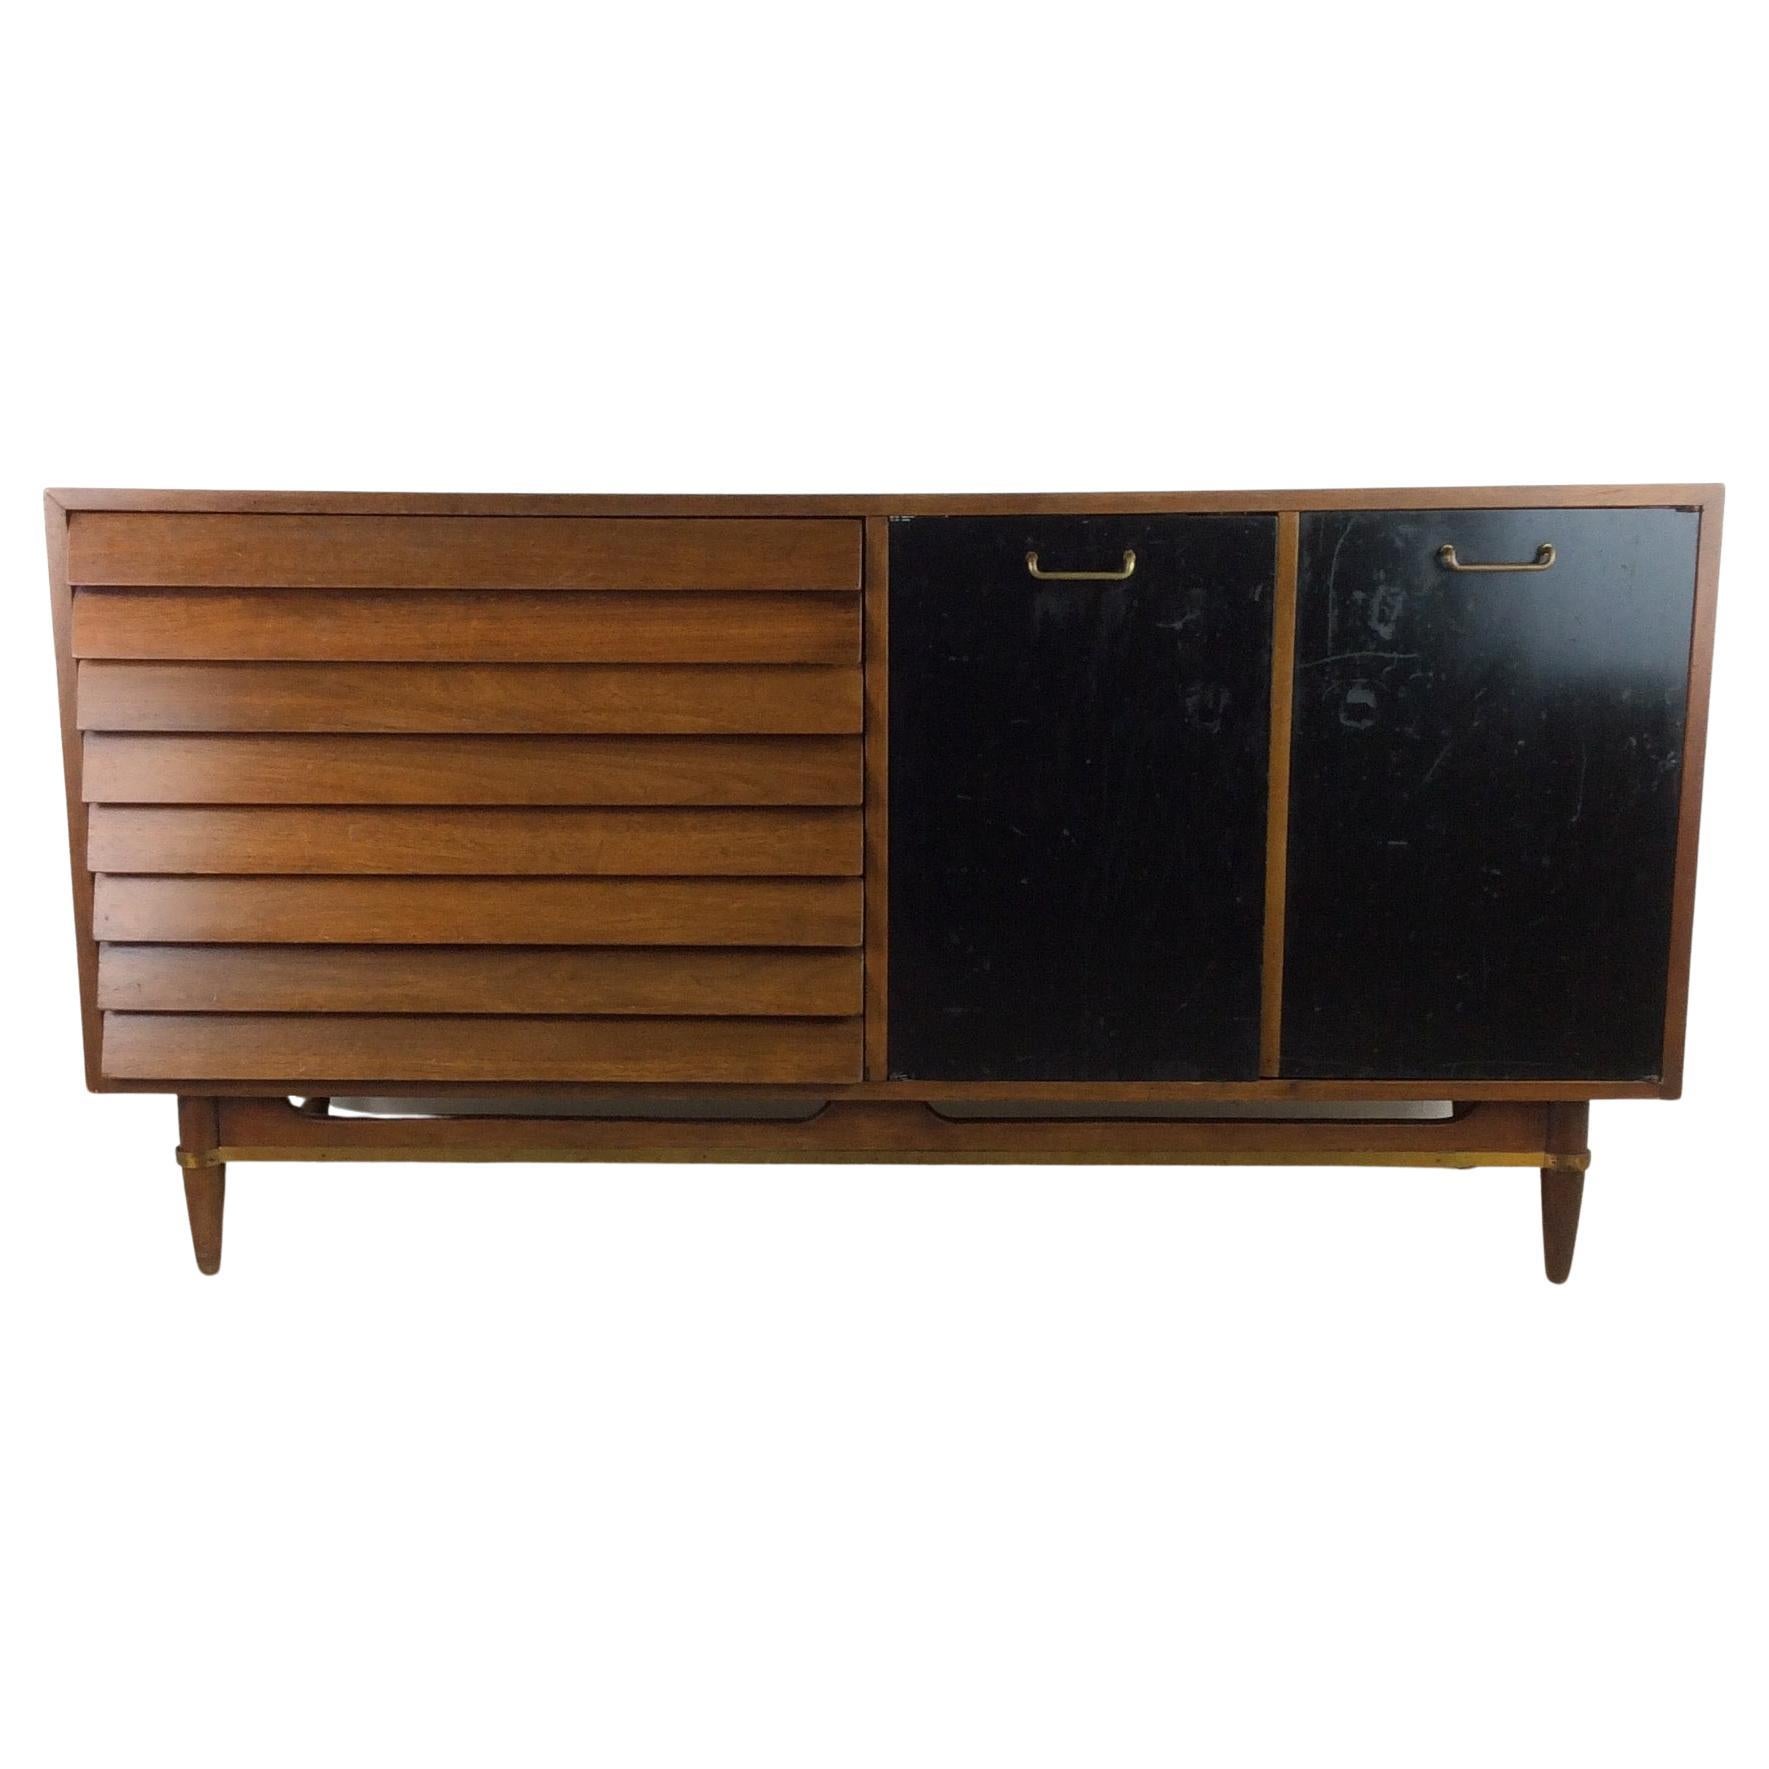 Mid-Century Modern Credenza from Dania by American of Martinsville